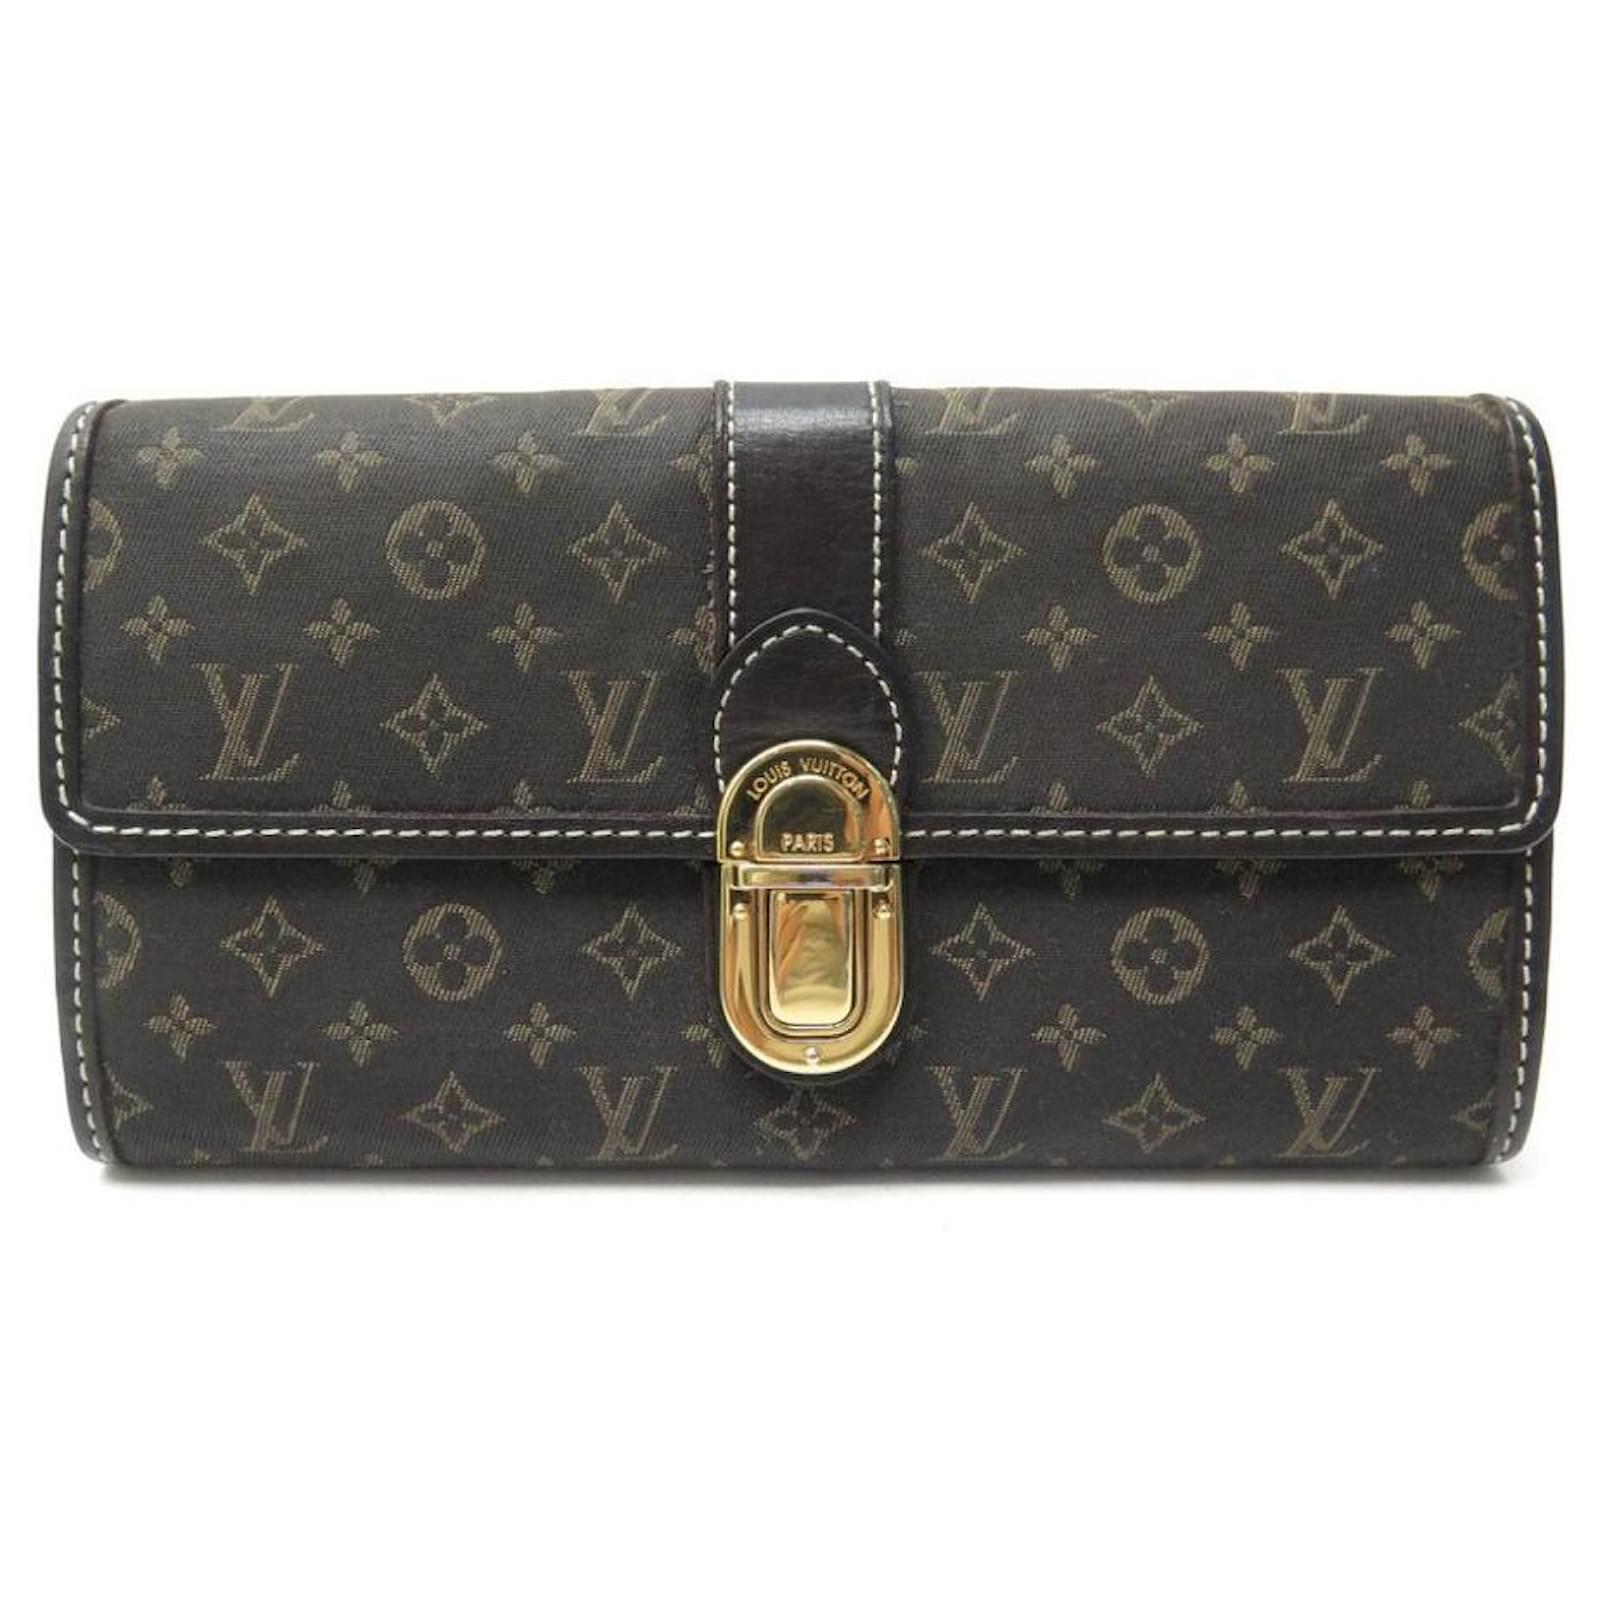 Louis Vuitton Wallet: Sarah - SMALL LEATHER GOODS